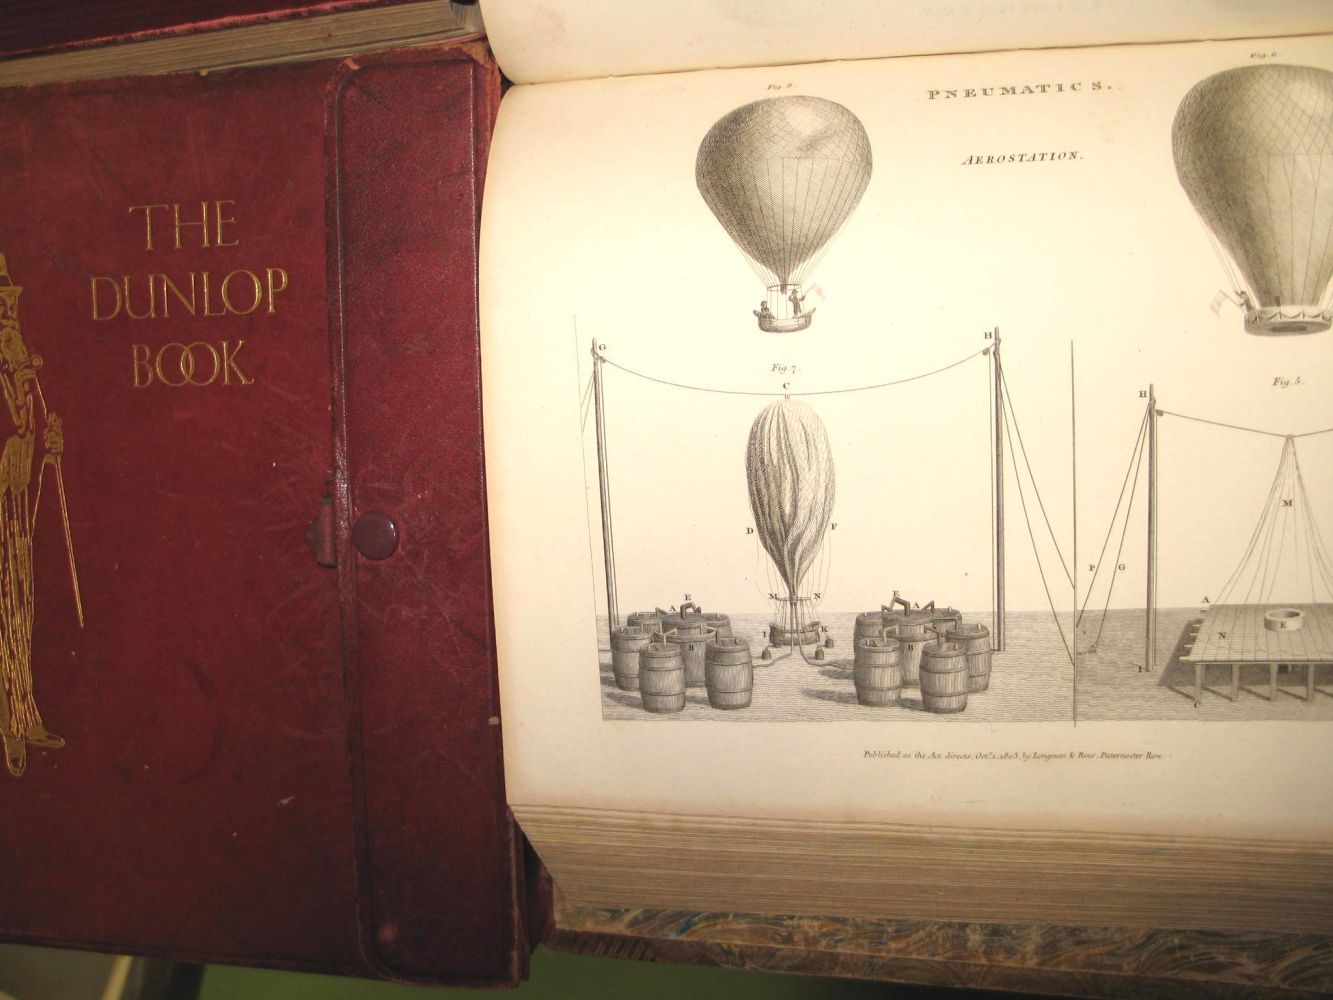 THE DUNLOP BOOK, 4to, 2nd Edn., L., n.d.; REE'S Cyclopedia, Plate Volume 4 (only), 4to, numerous